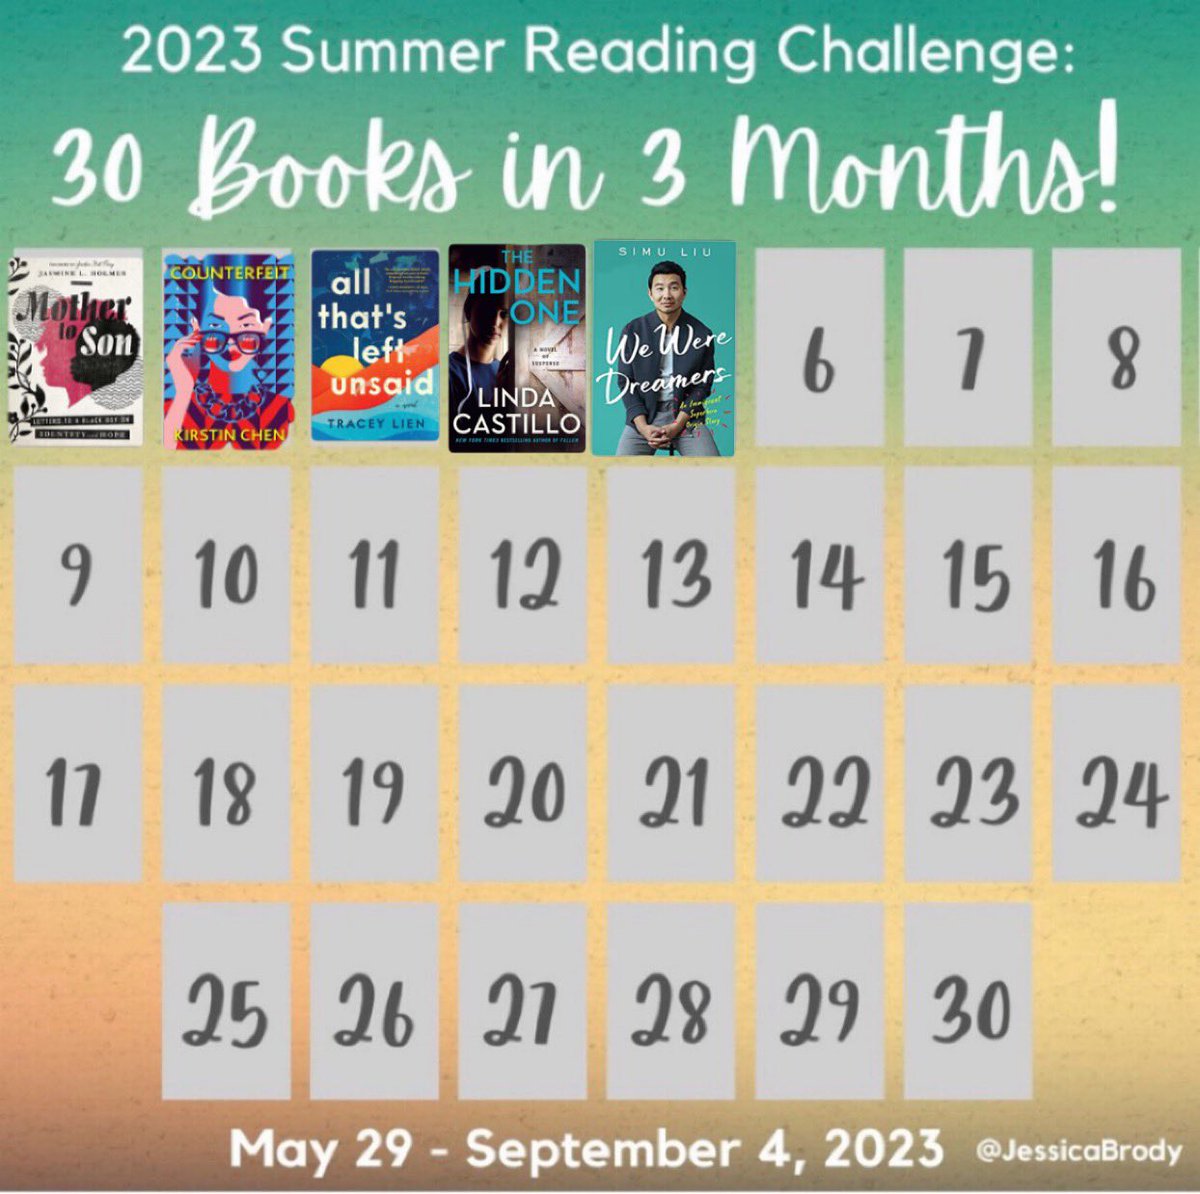 I’m also participating in this year’s #30booksIn3months challenge ☀️📚

Anyone else joining?!? #pd4uandme